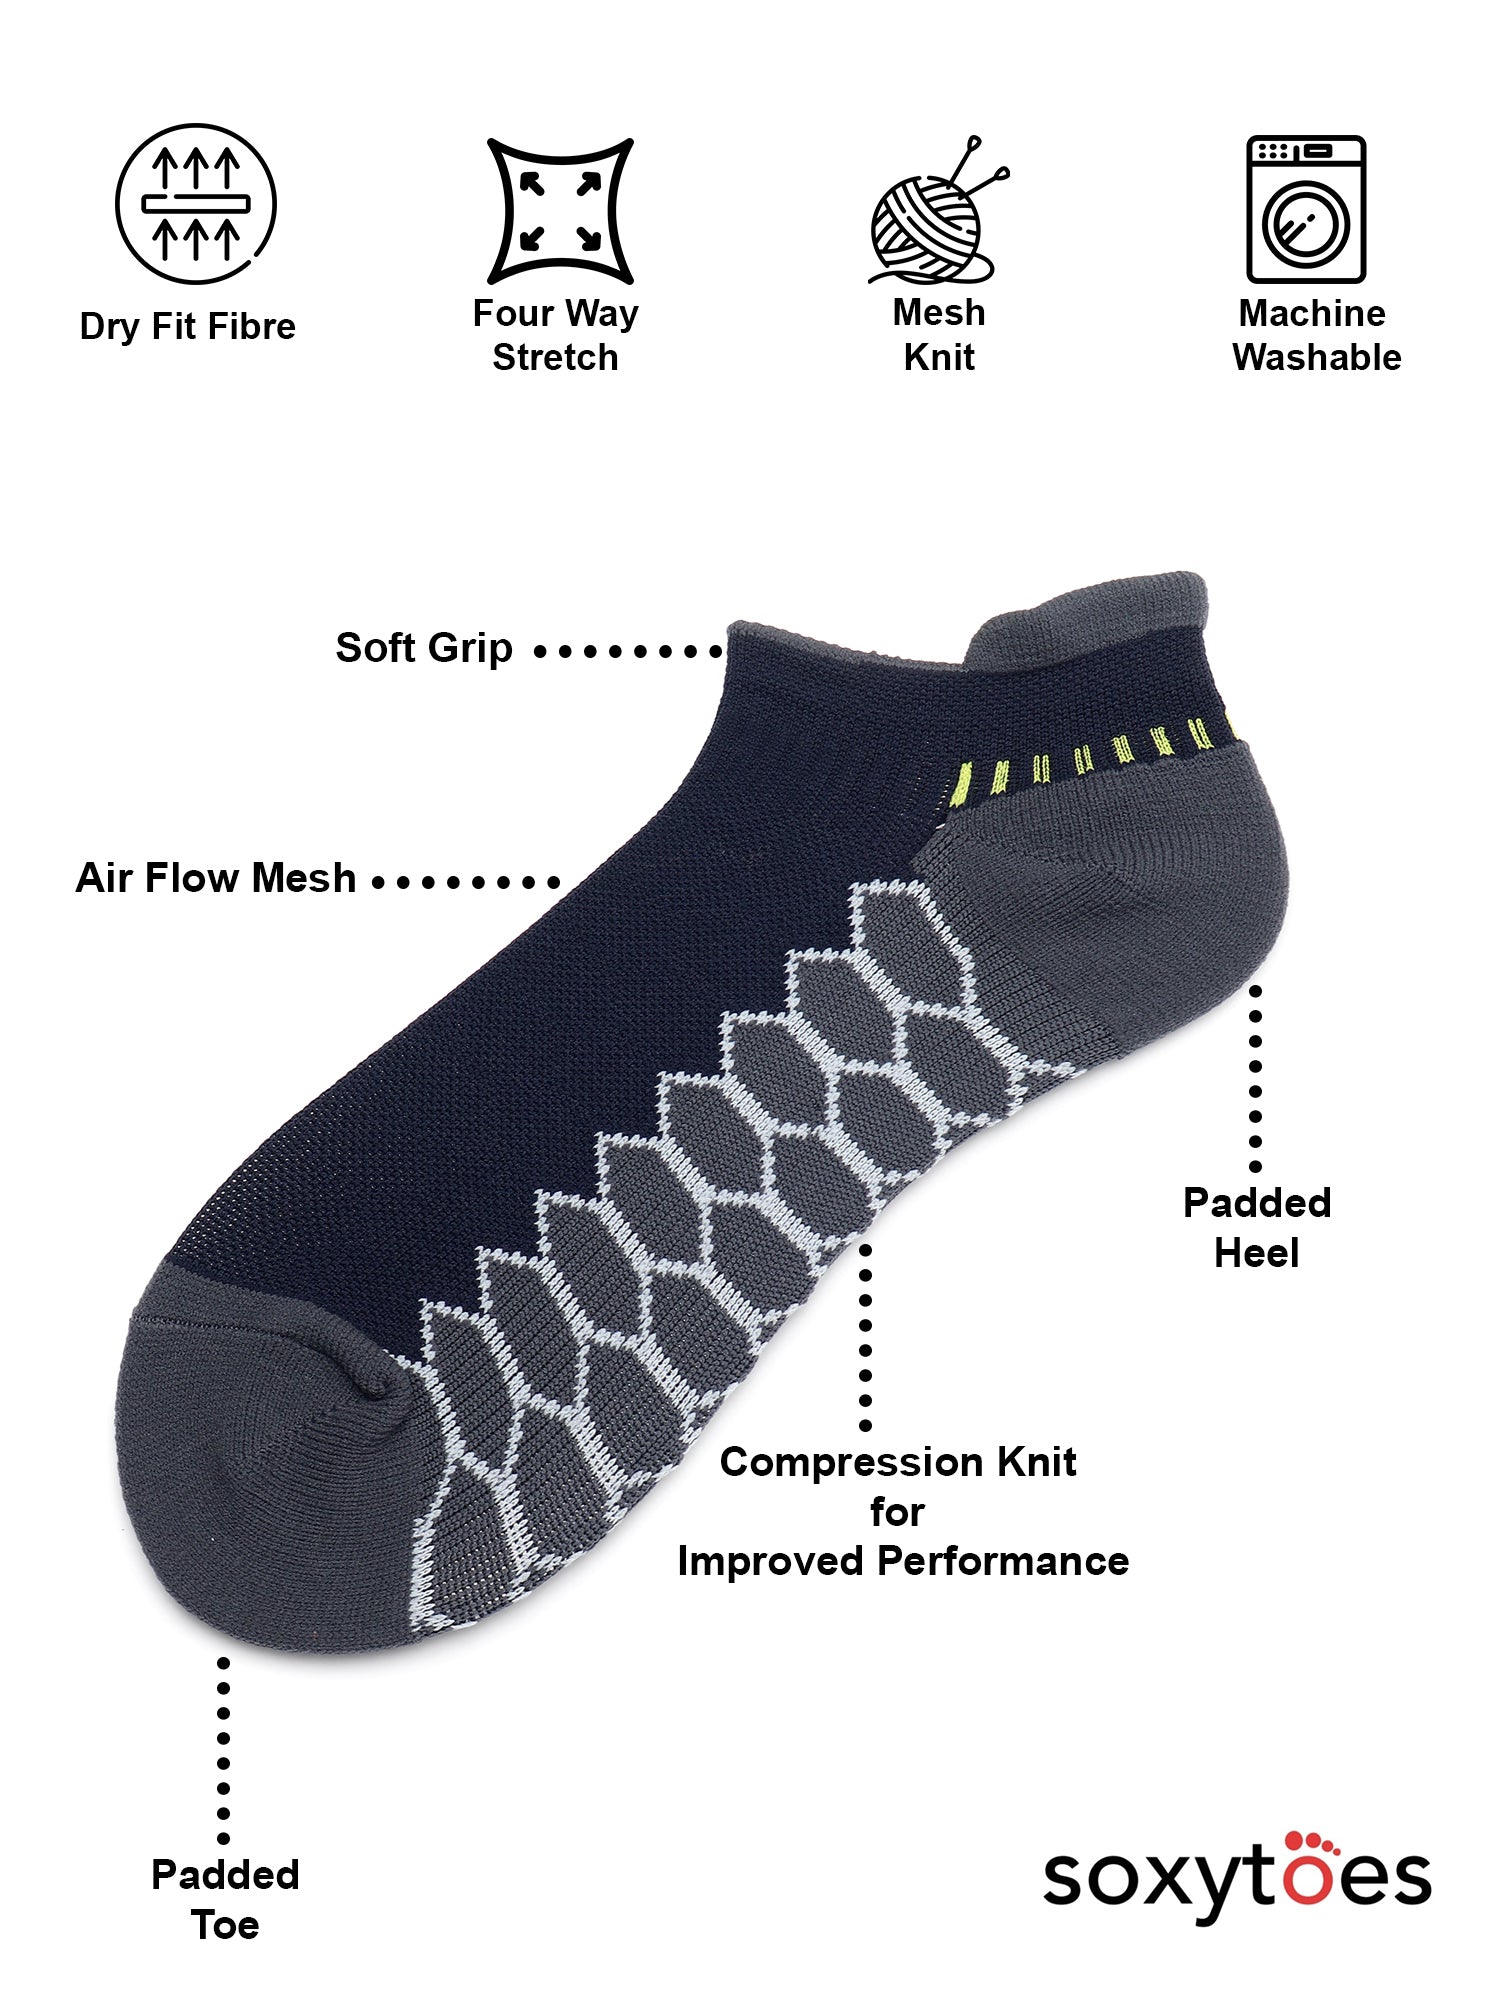 Performax | The Jock Sock | Stand Out Box Of 4 Pairs | Low Cut Sports Socks